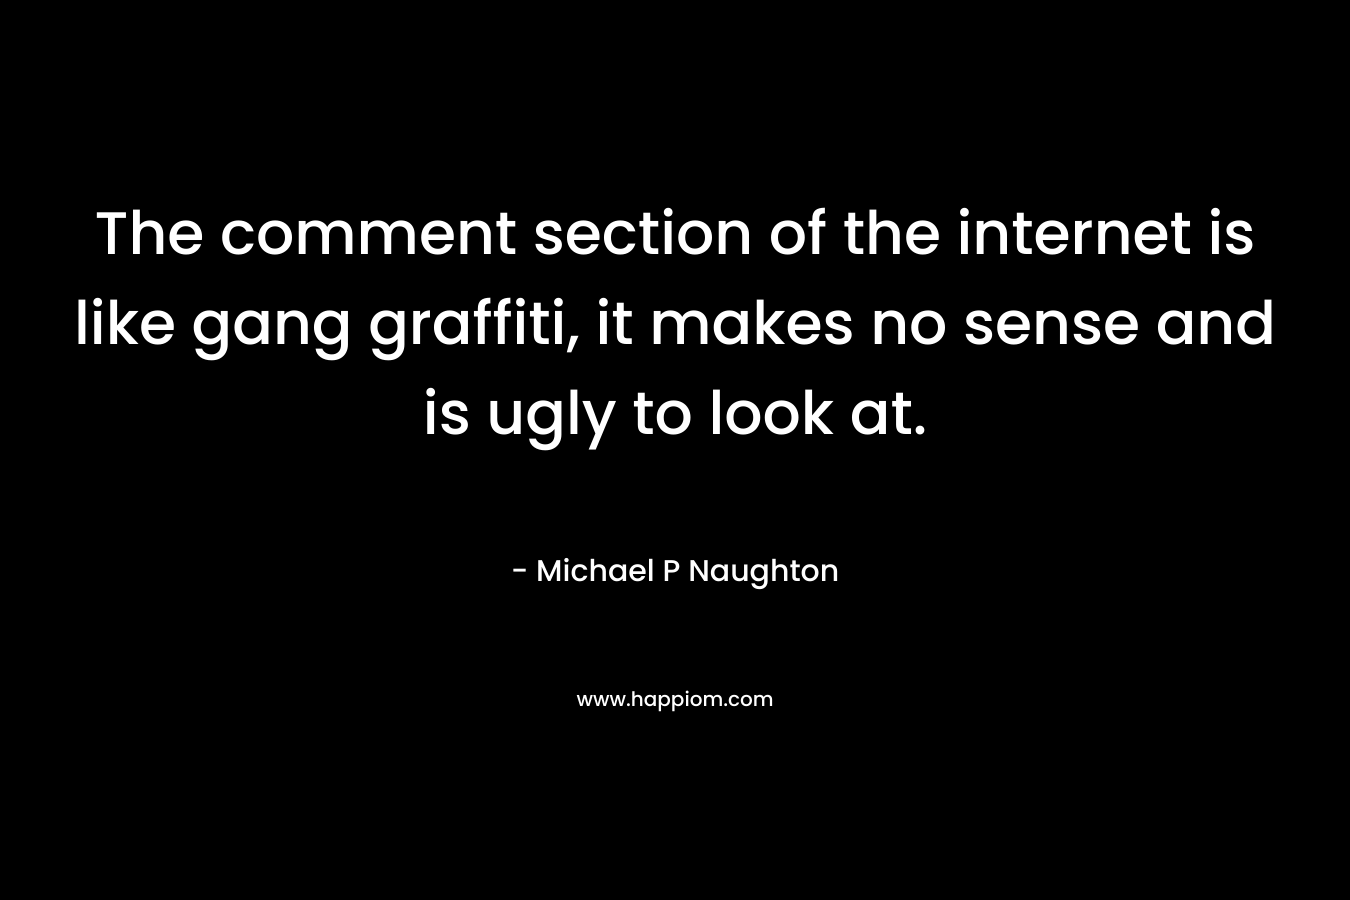 The comment section of the internet is like gang graffiti, it makes no sense and is ugly to look at.